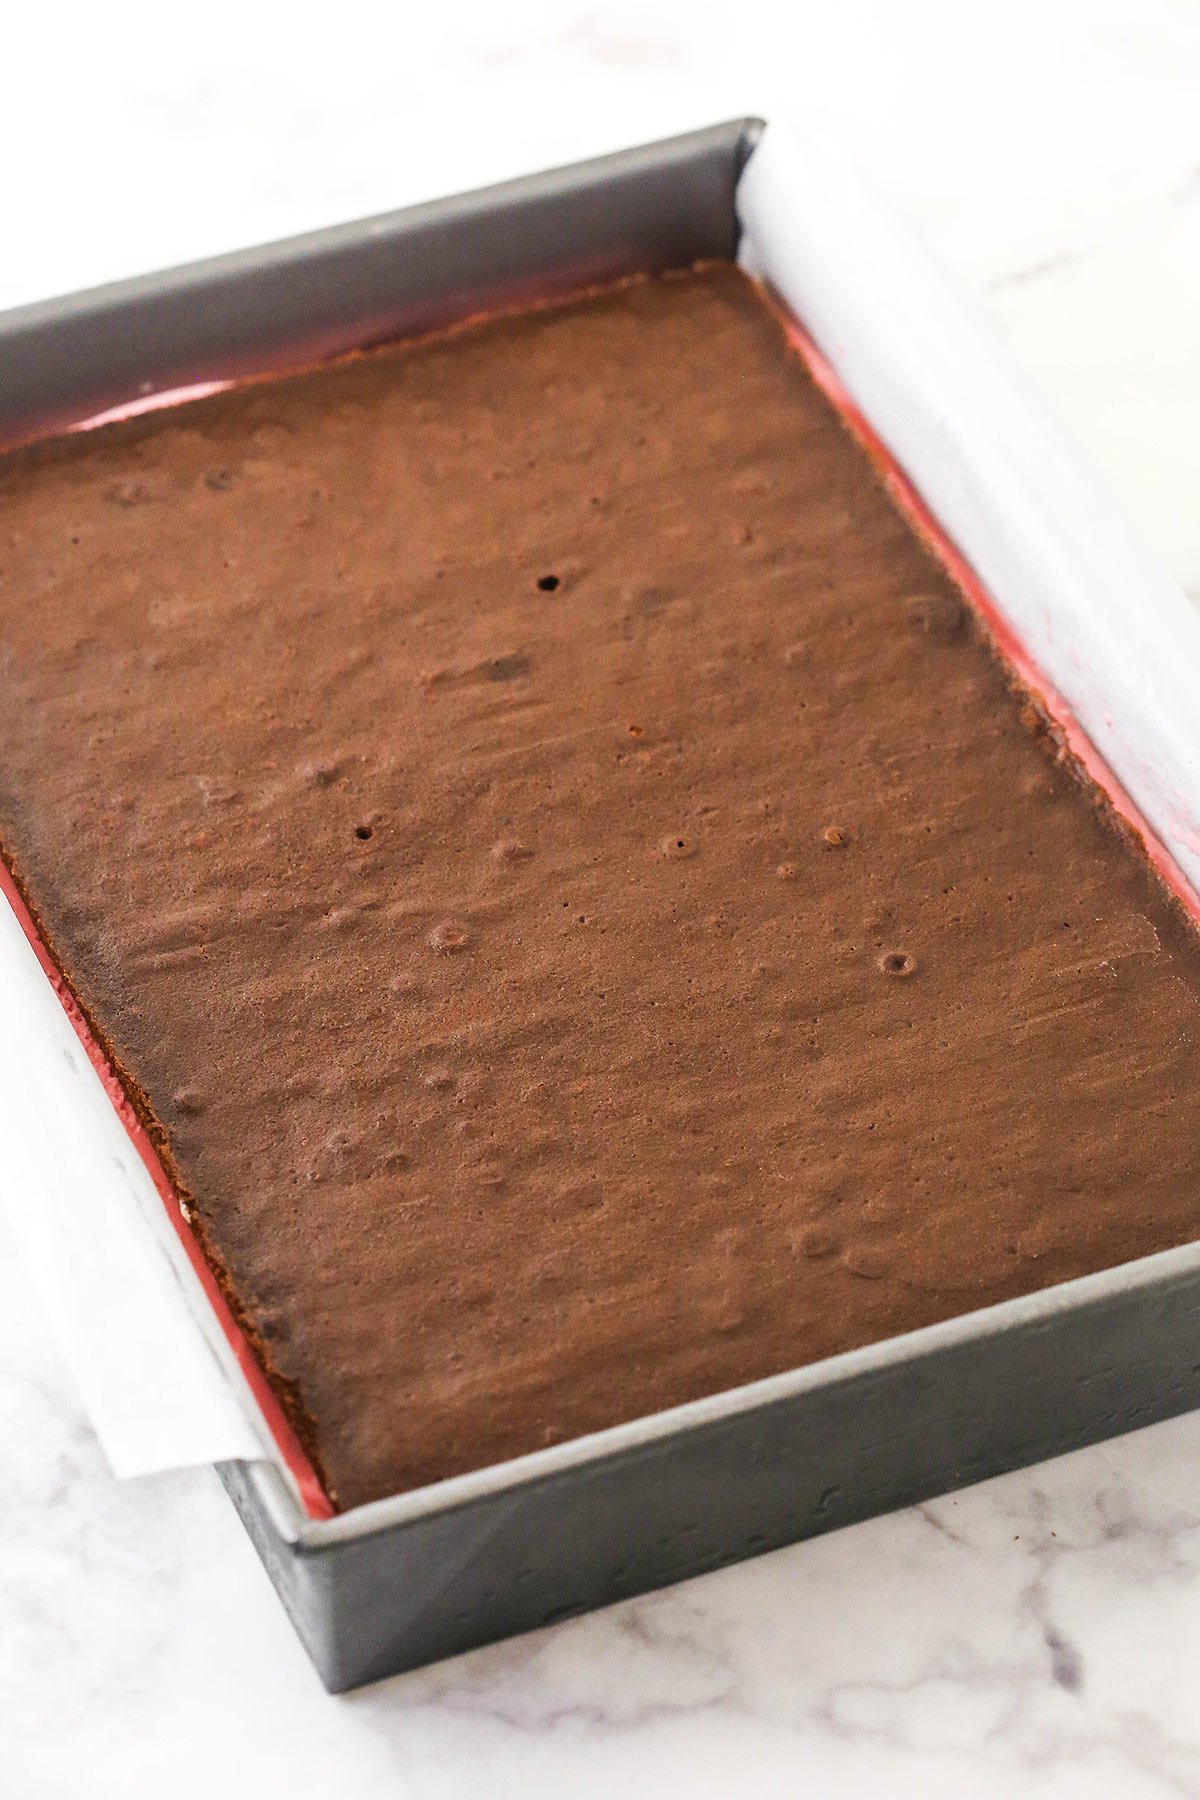 An assembled batch of ice cream sandwiches inside of a pan lined with overhanging parchment paper